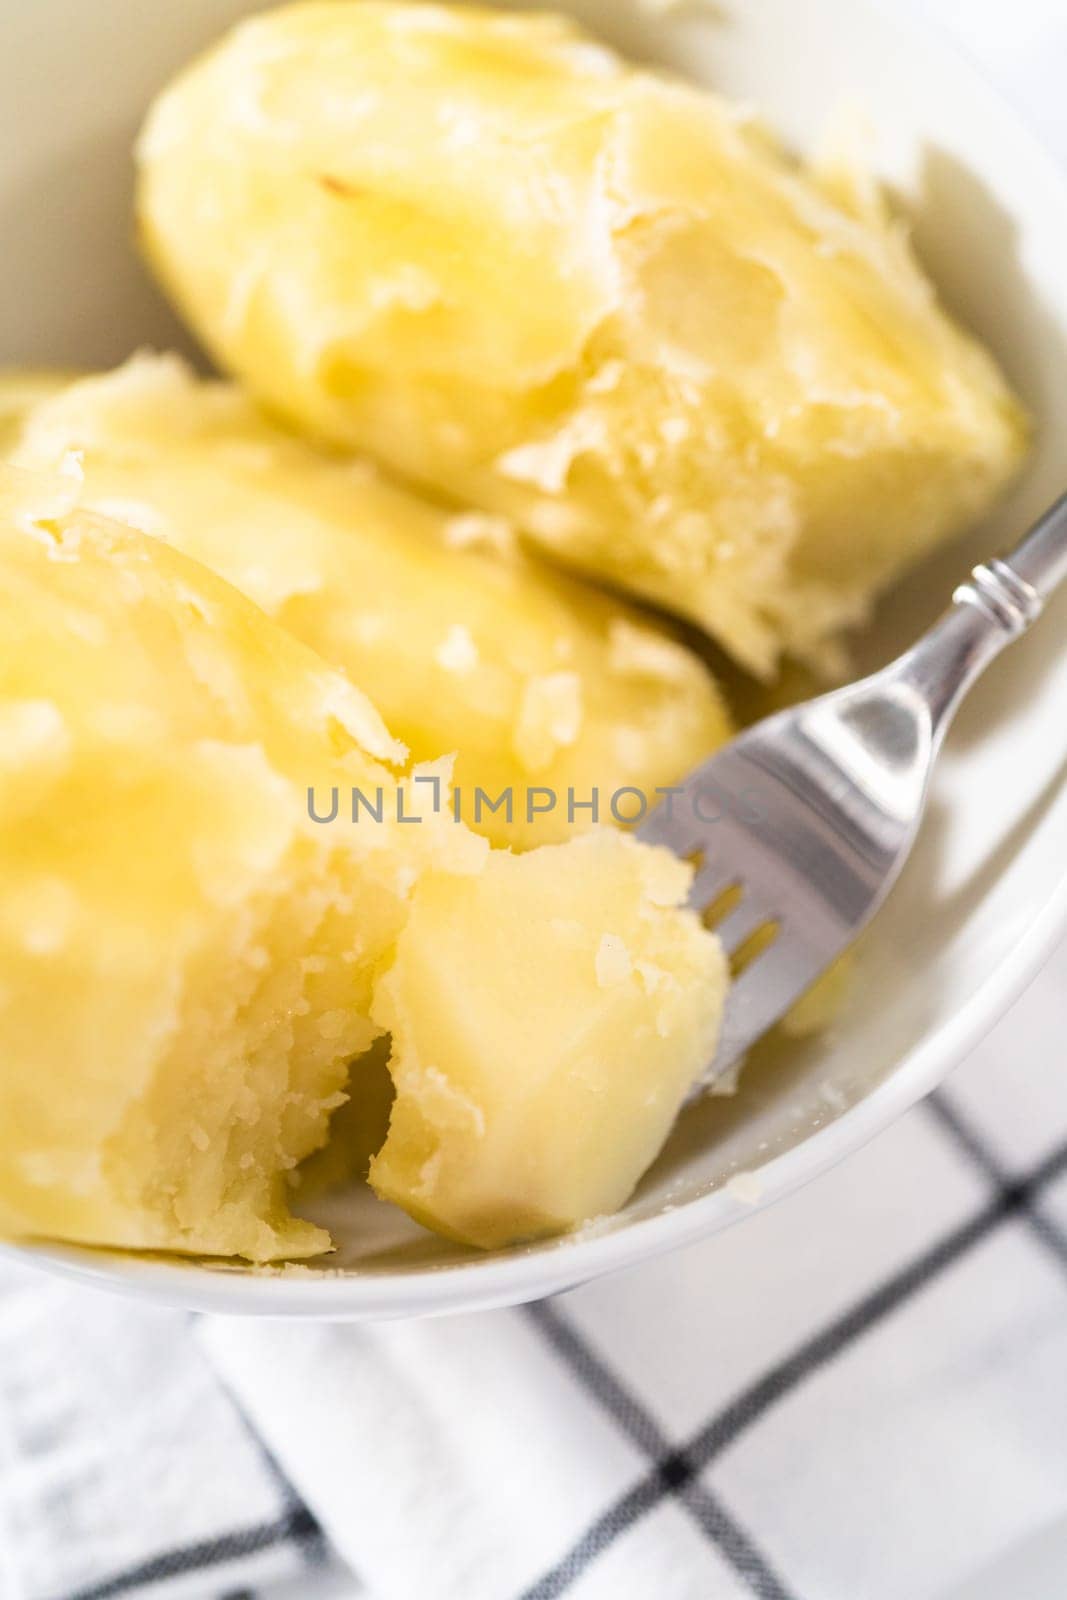 Mashed potatoes. Cooking whole peeled potatoes in a white bowl.